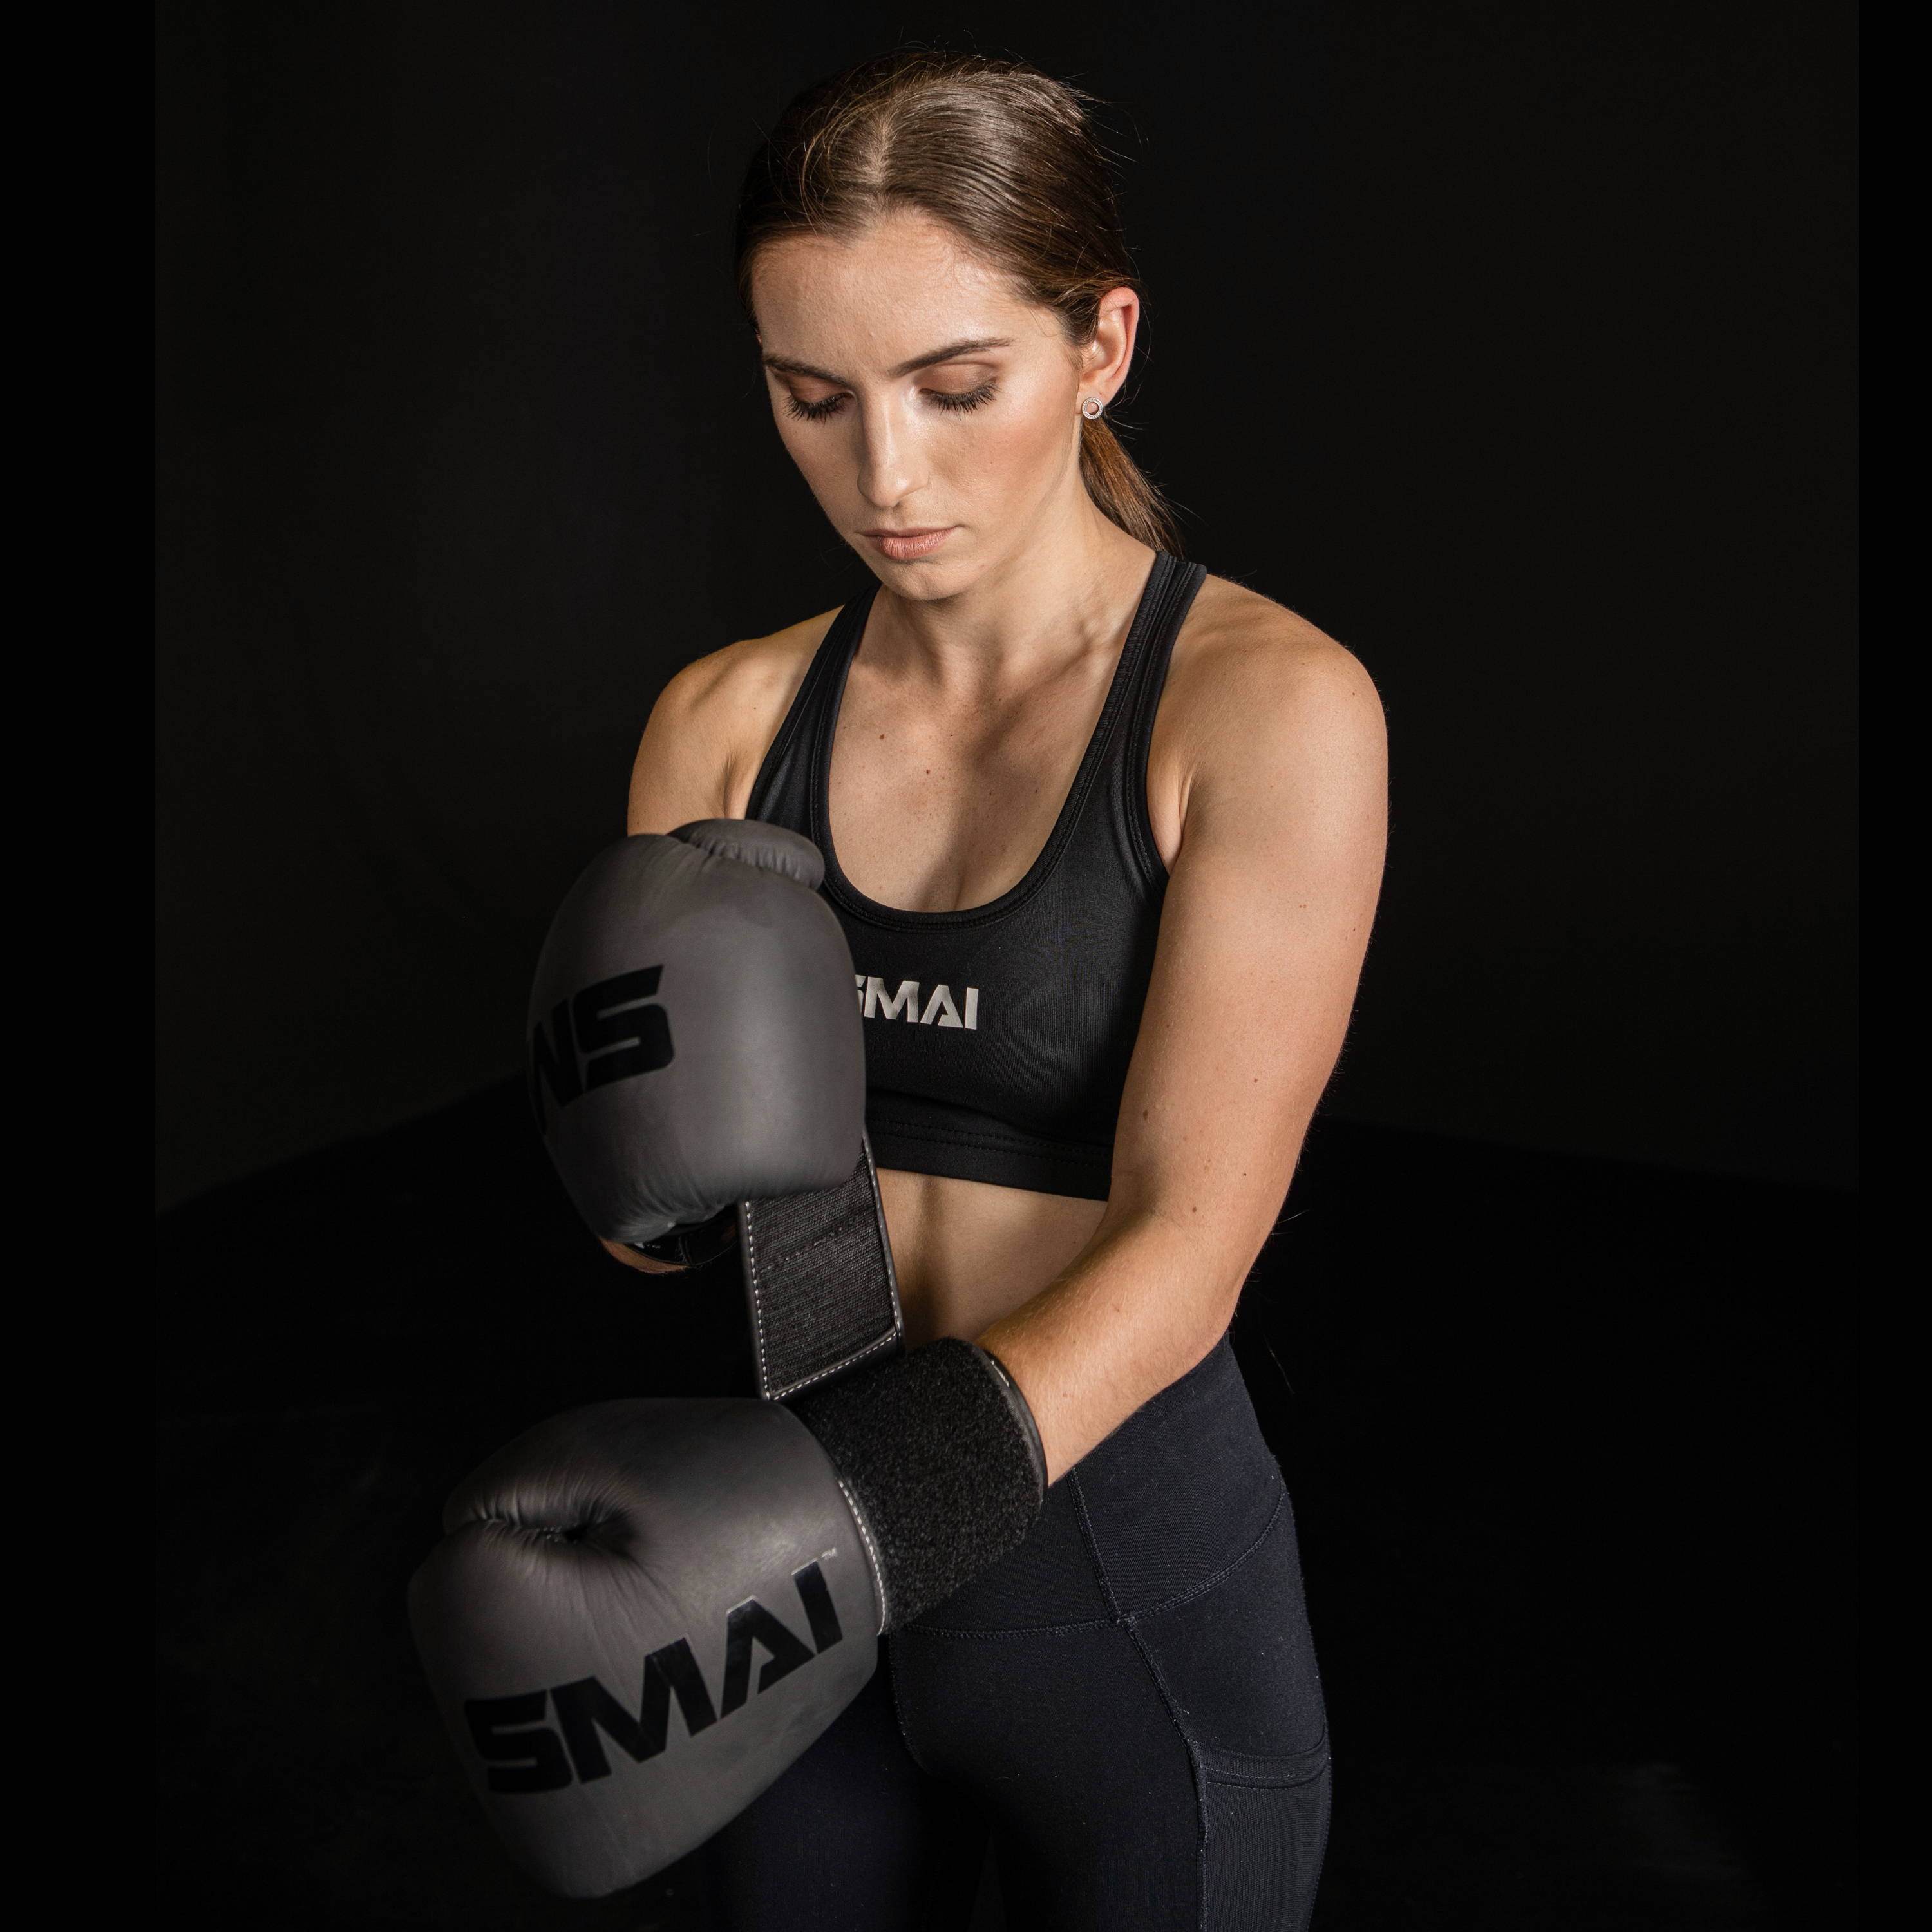 Model putting on a boxing glove